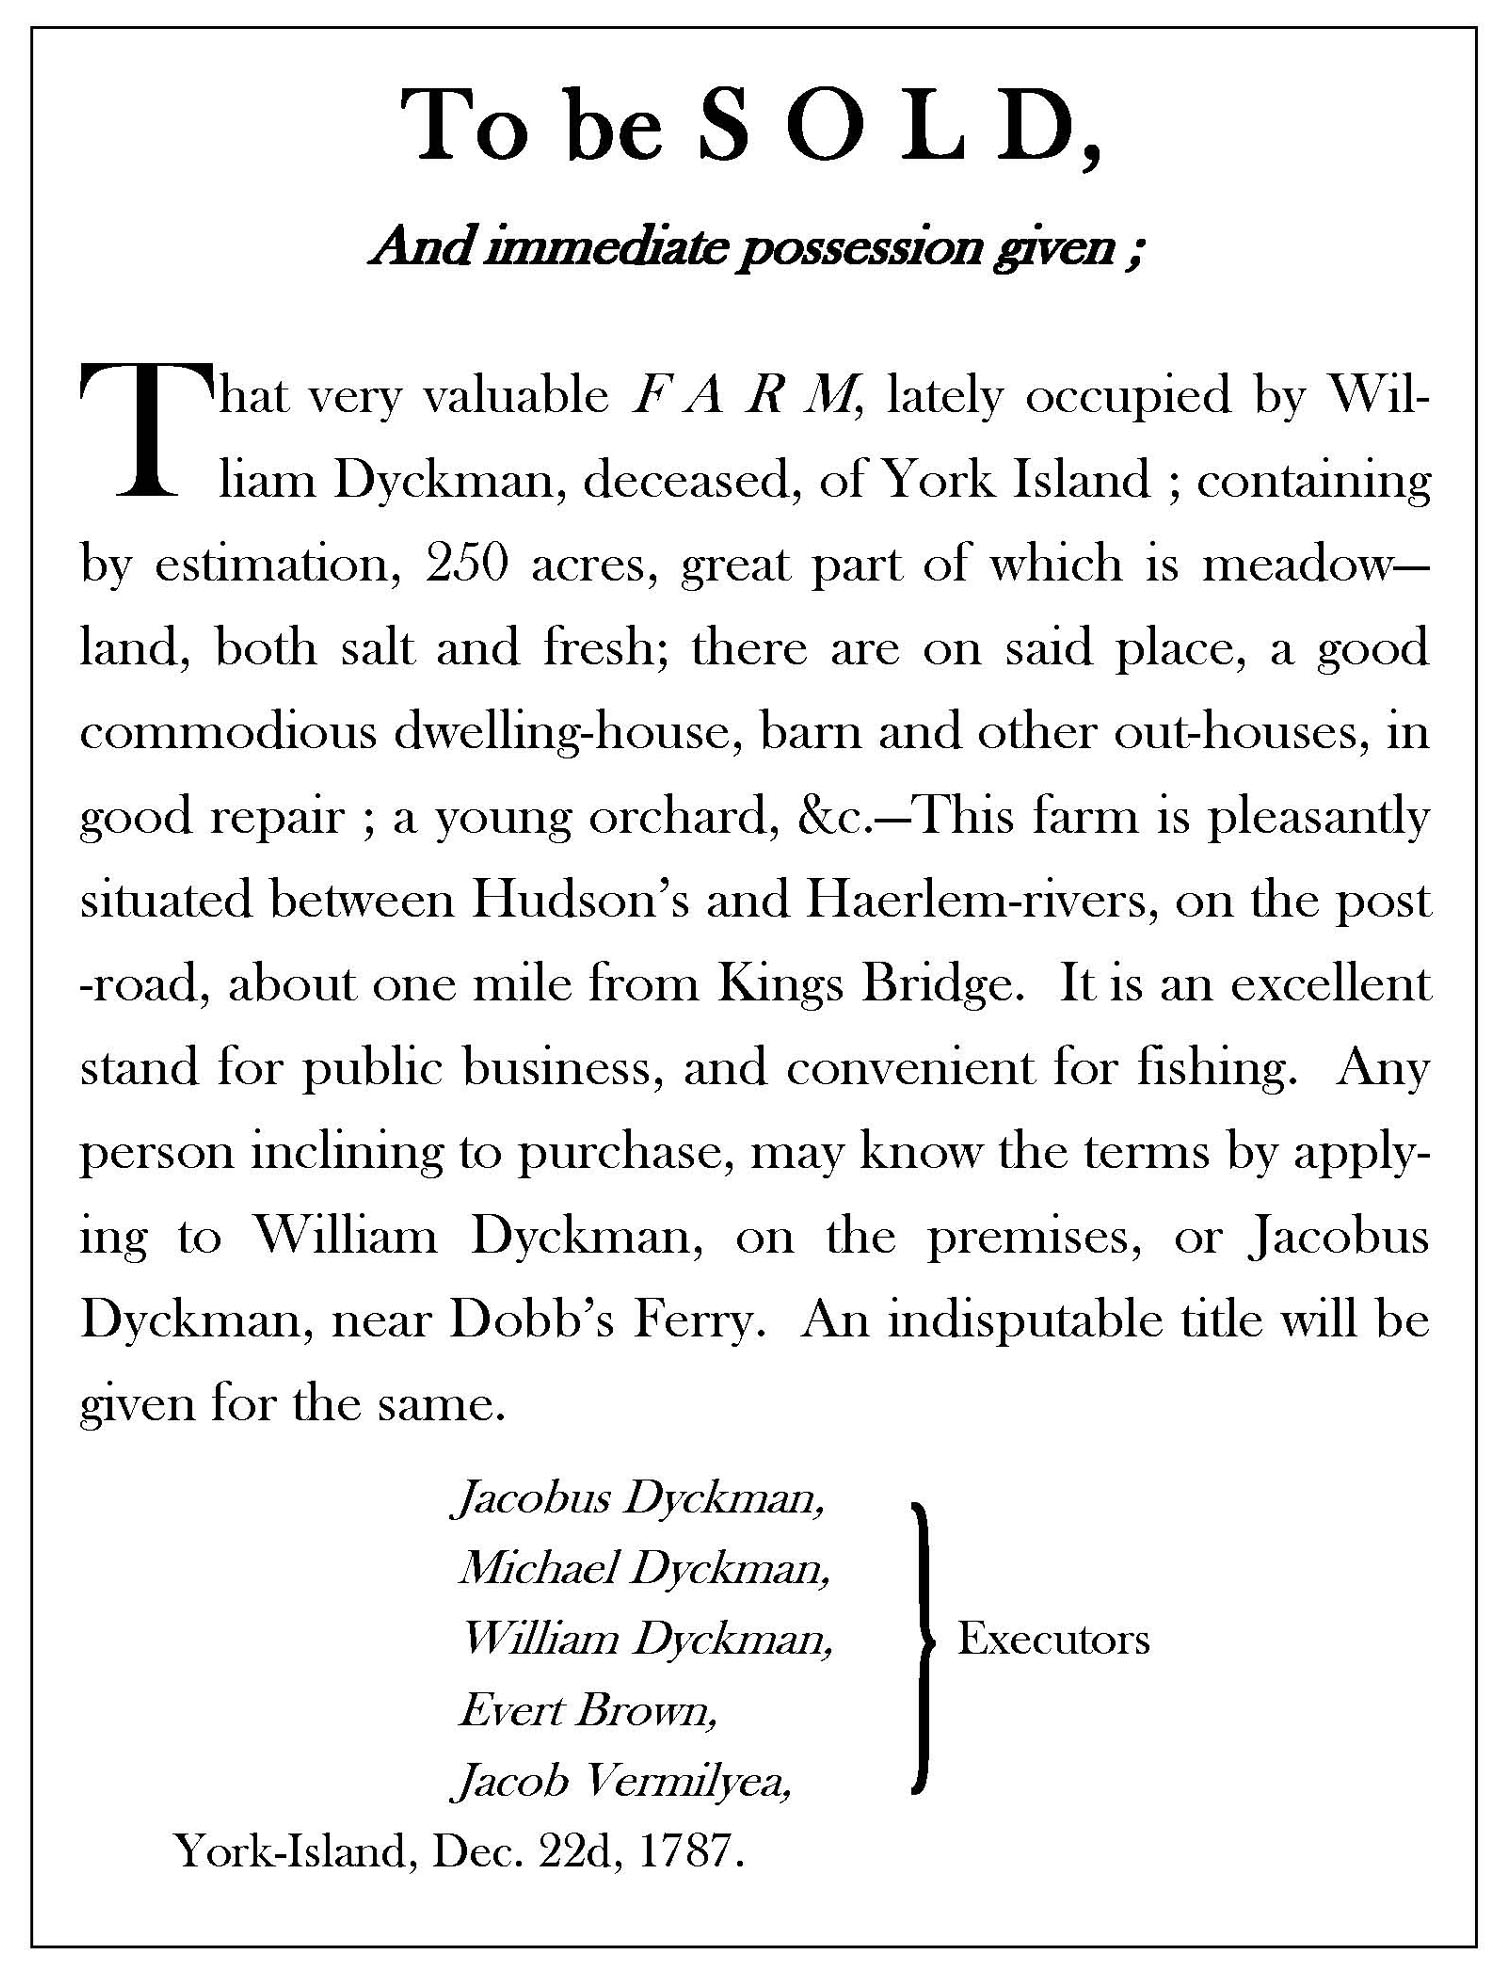 Text of the 1788 advertisement of the Dyckman property.